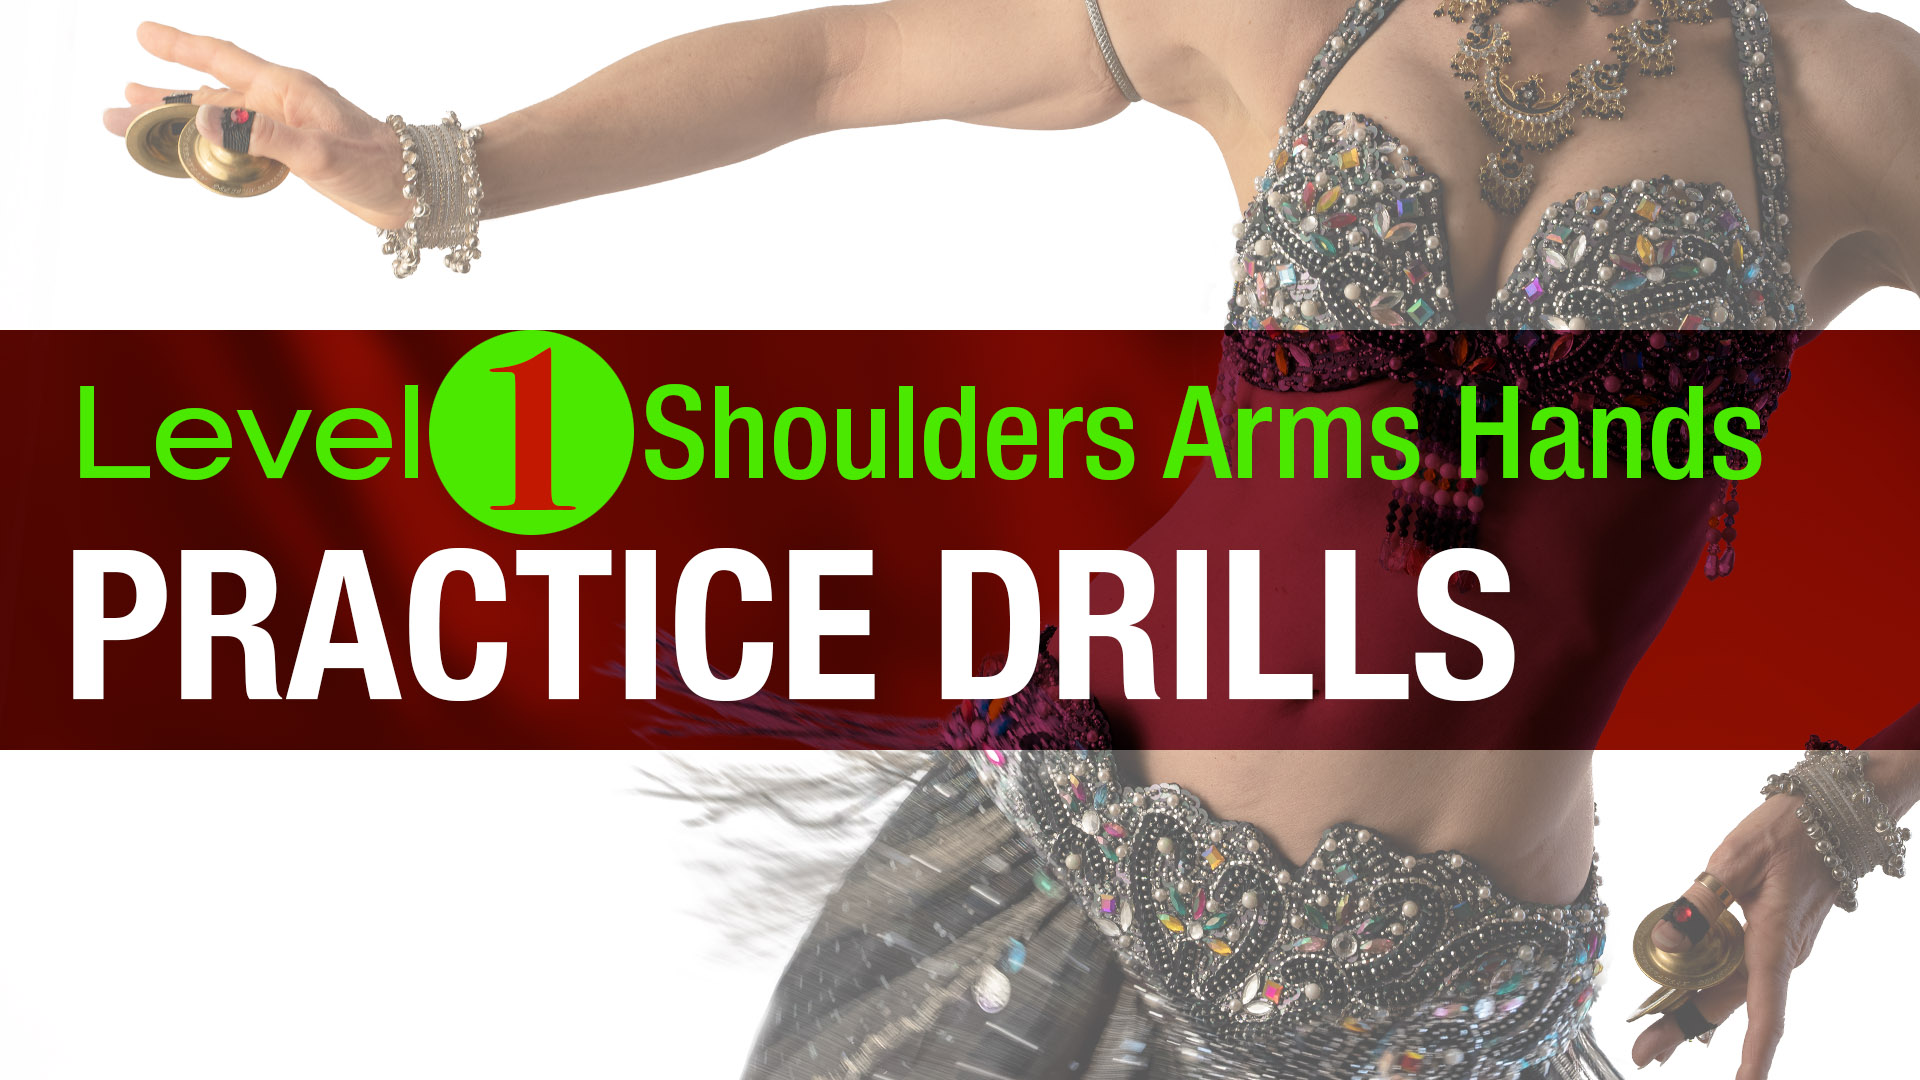 Belly dancer torso with text naming online class